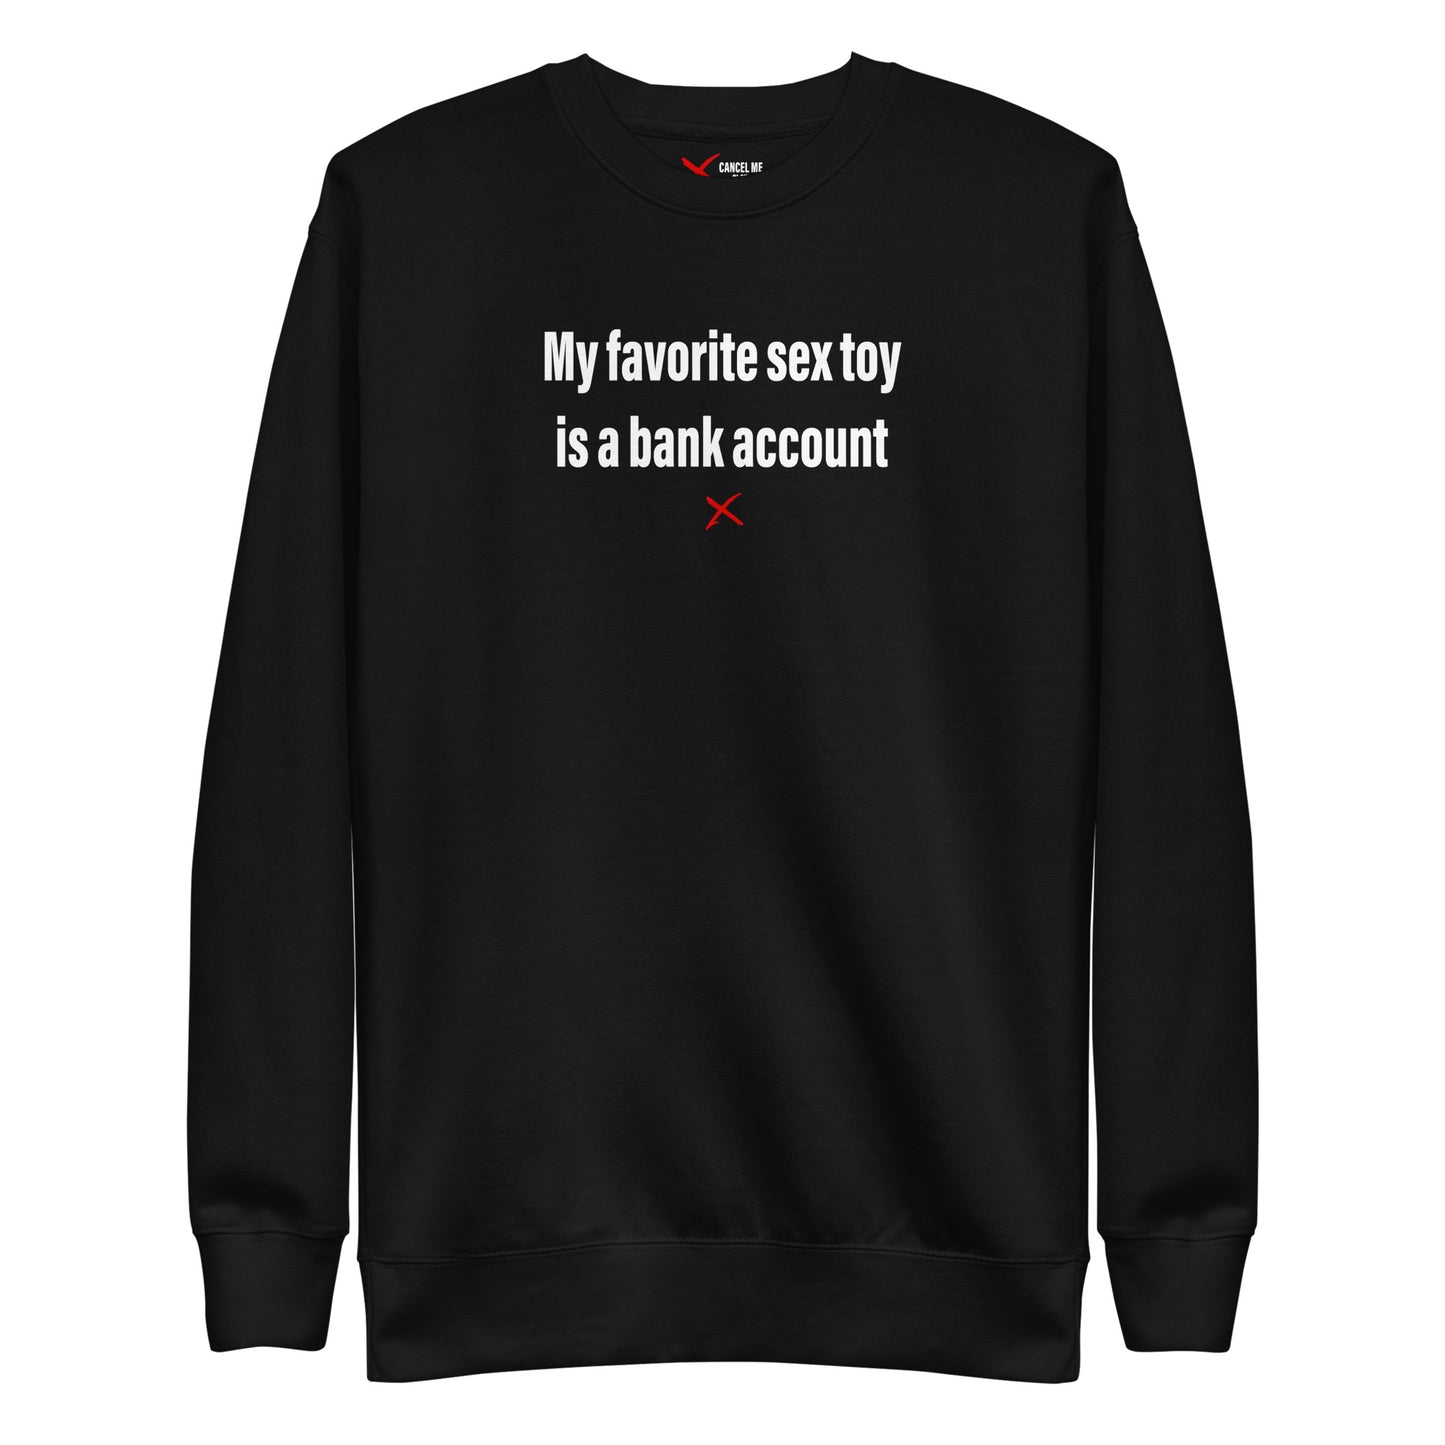 My favorite sex toy is a bank account - Sweatshirt